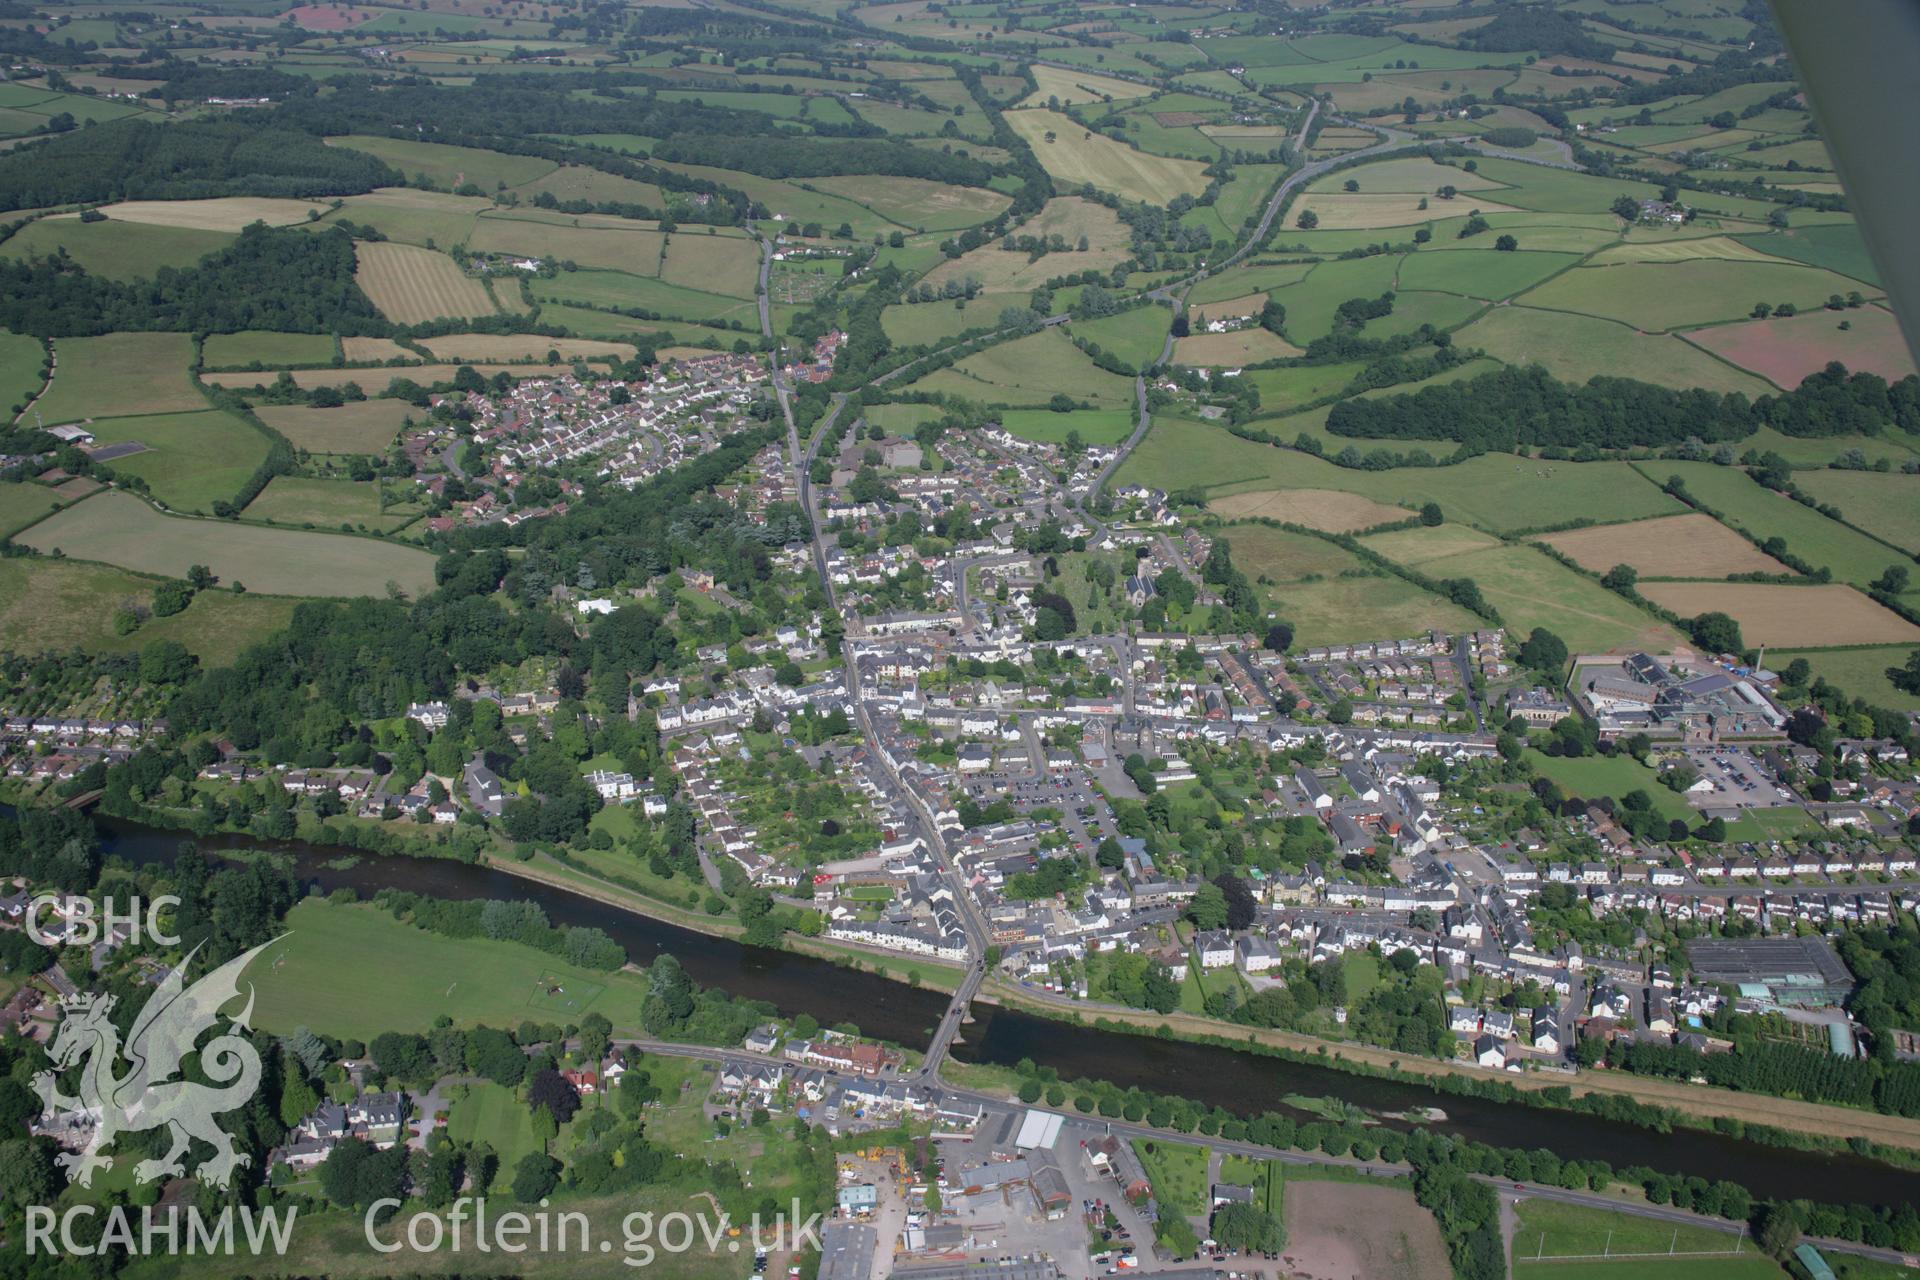 RCAHMW colour oblique aerial photograph of Usk. Taken on 13 July 2006 by Toby Driver.